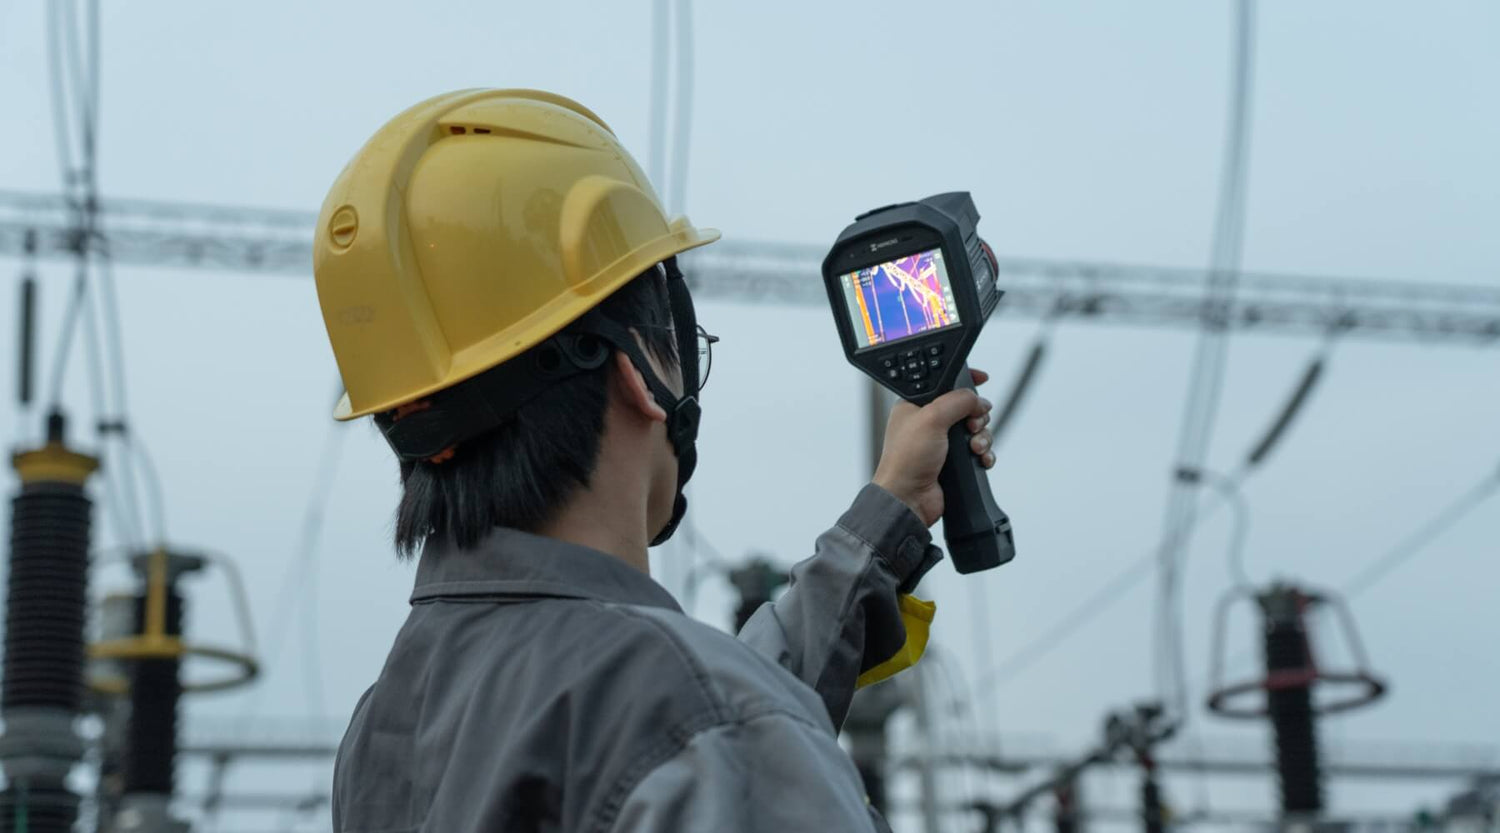 HikMicro G61 Handheld Thermal Imager Camera being used to measure temperature on electrical distribution lines.